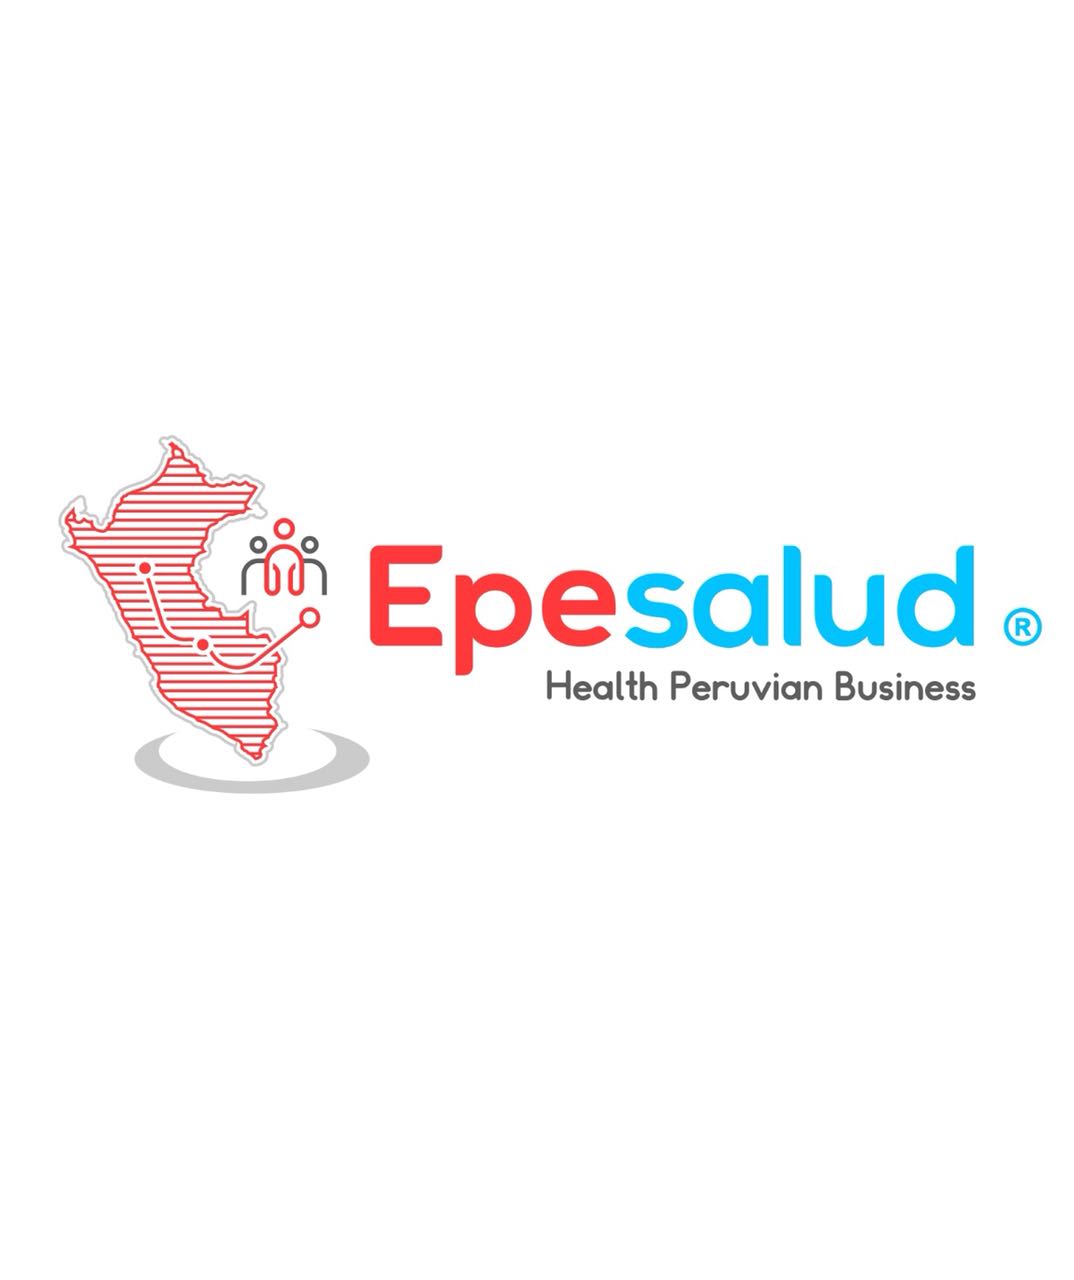 HEALTH PERUVIAN BUSINESS EPESALUD